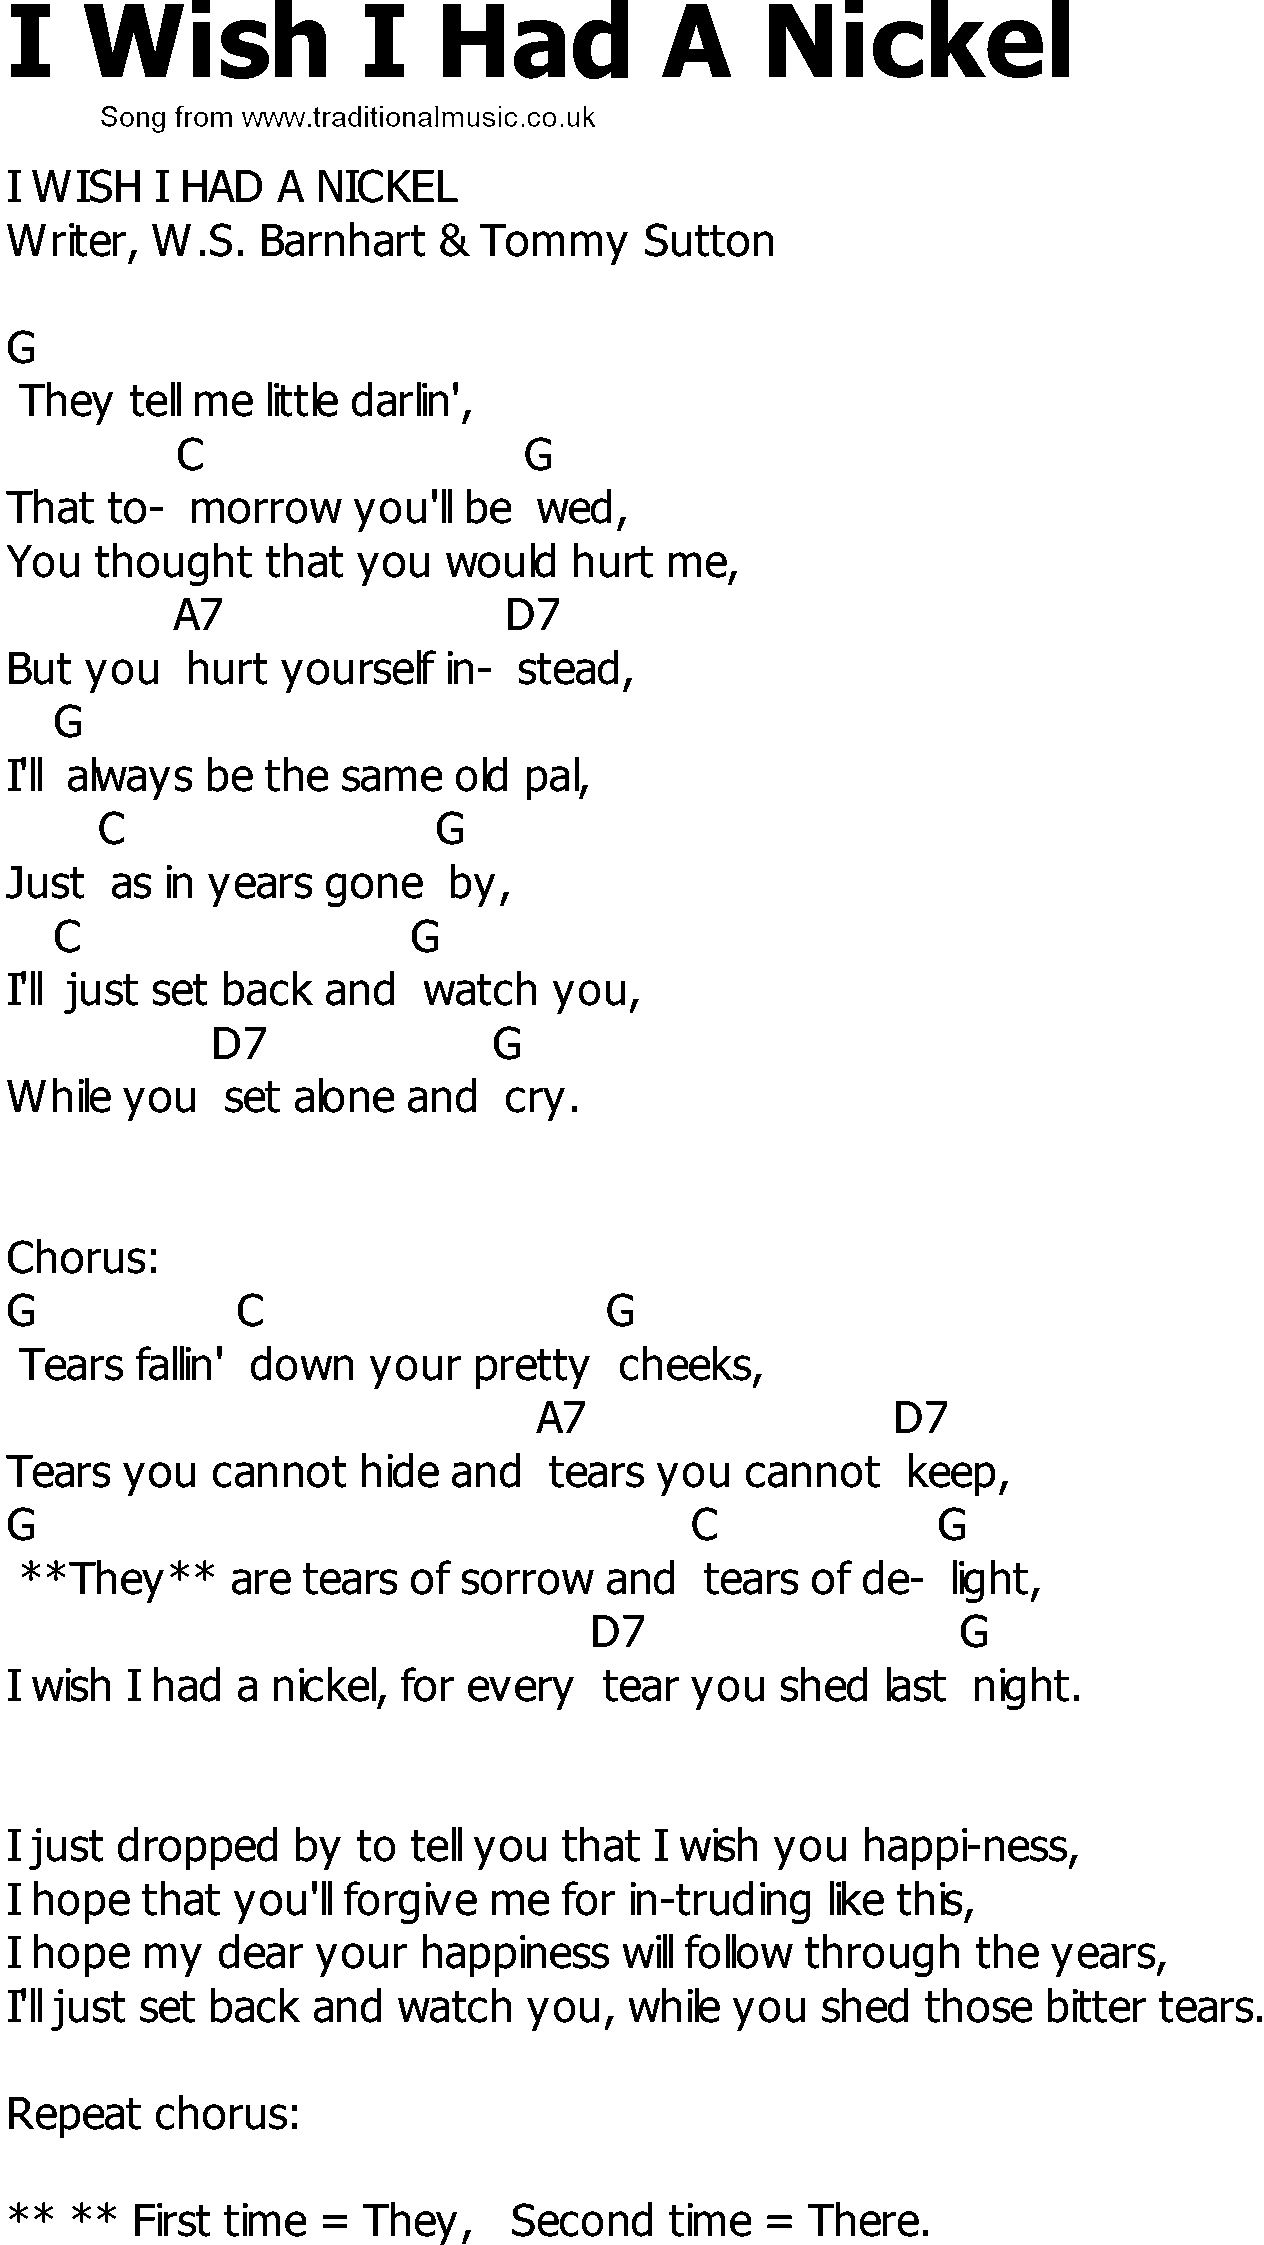 Old Country song lyrics with chords - I Wish I Had A Nickel